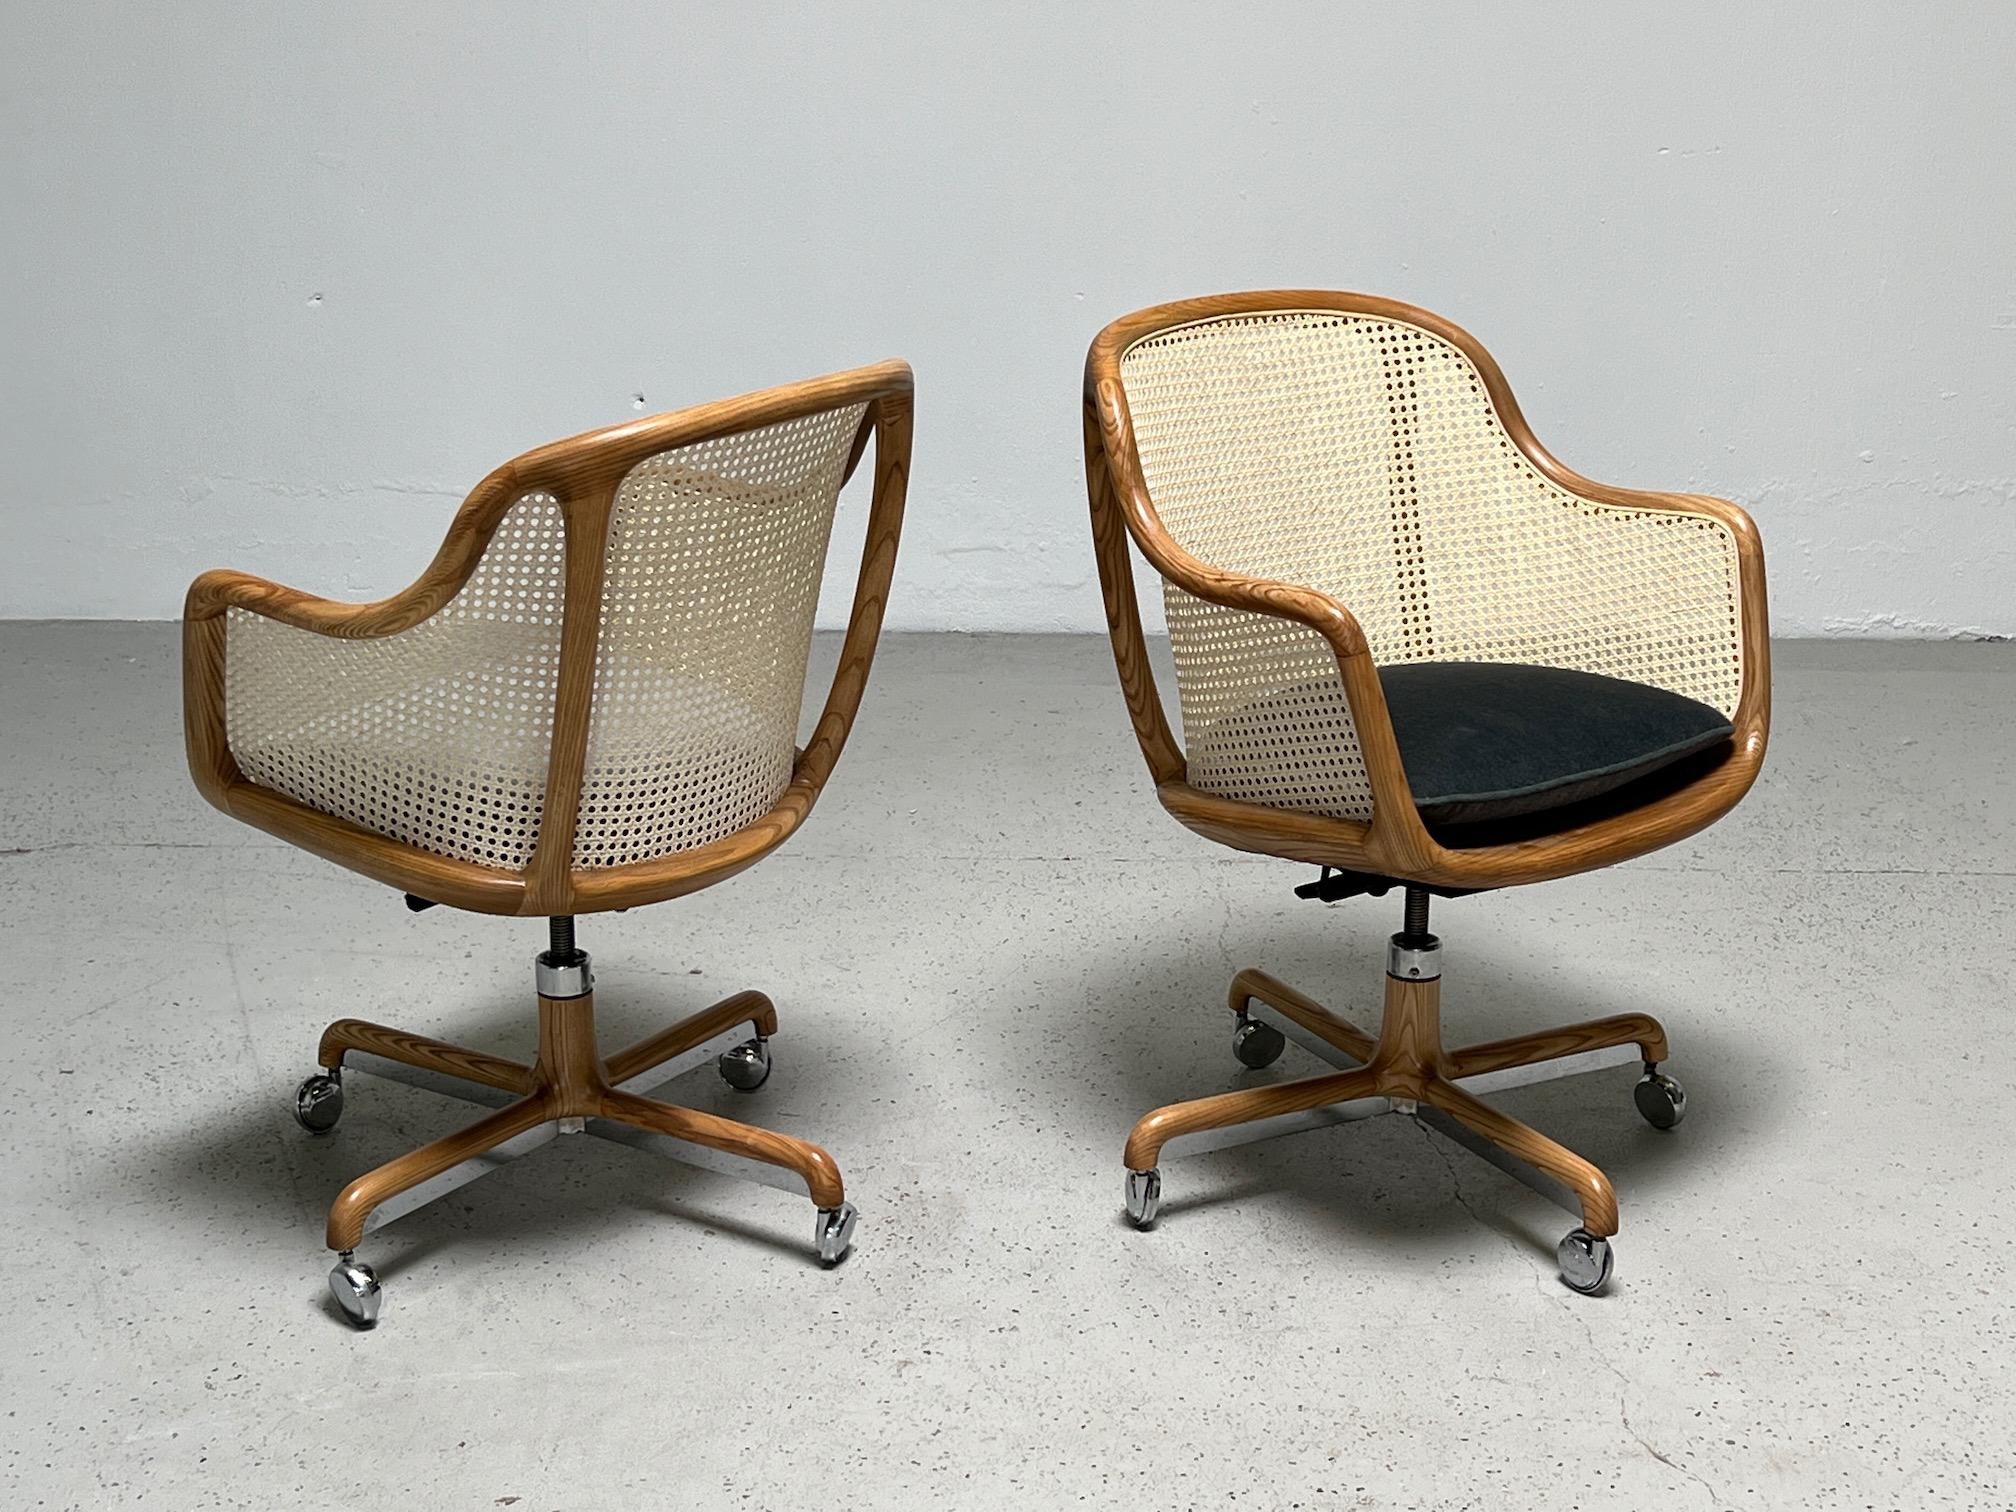 A fully caned tilt / swivel desk chair designed by Ward Bennett for Brickel. Several available. Priced individually.